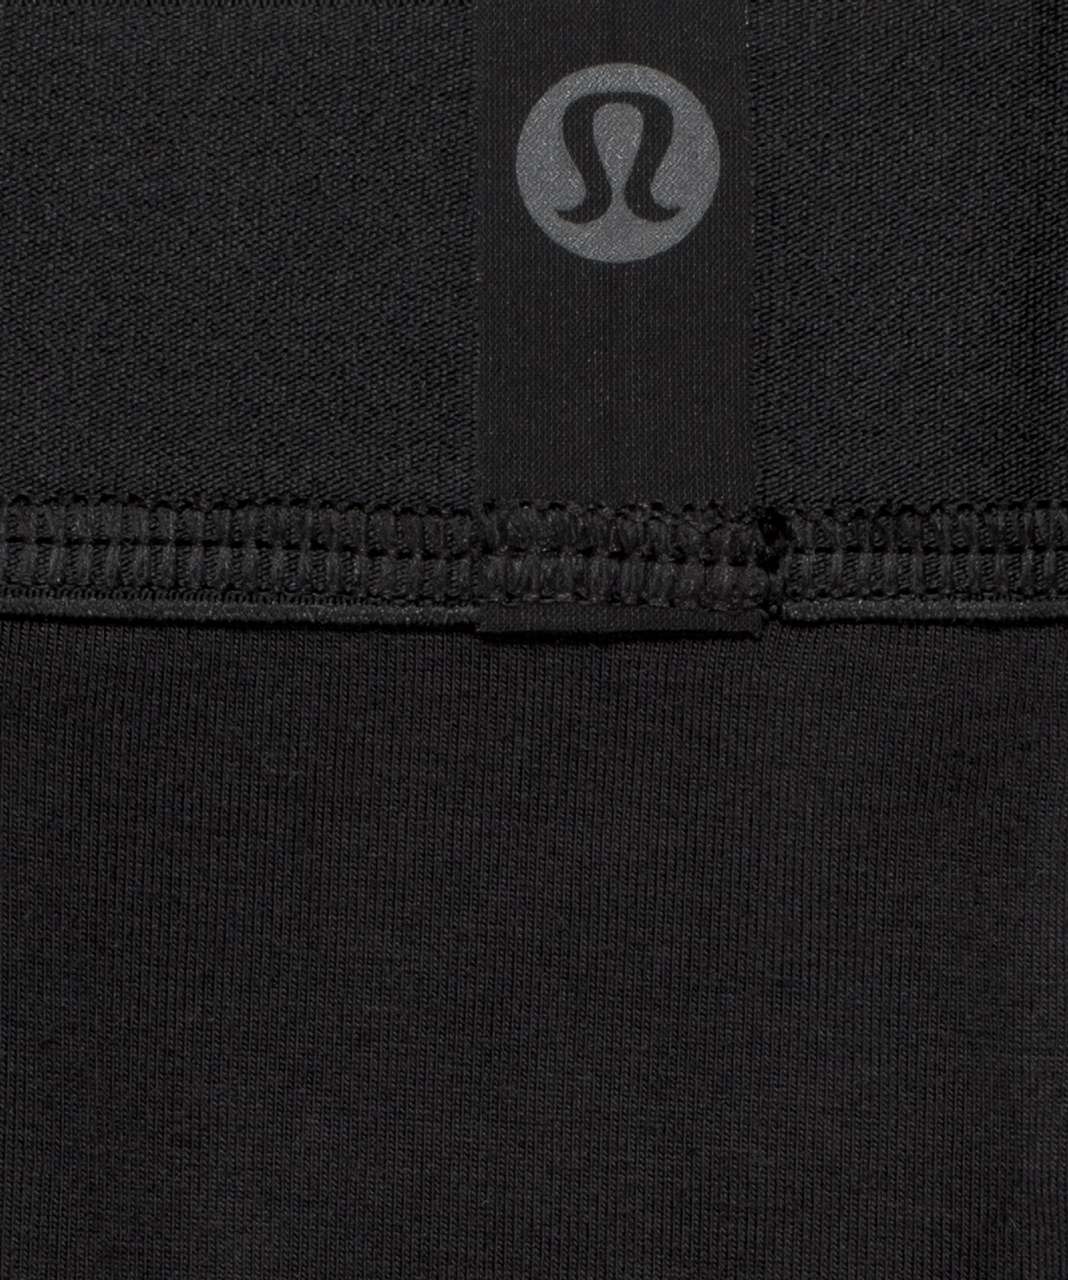 Lululemon Always In Motion Brief with Fly - Black